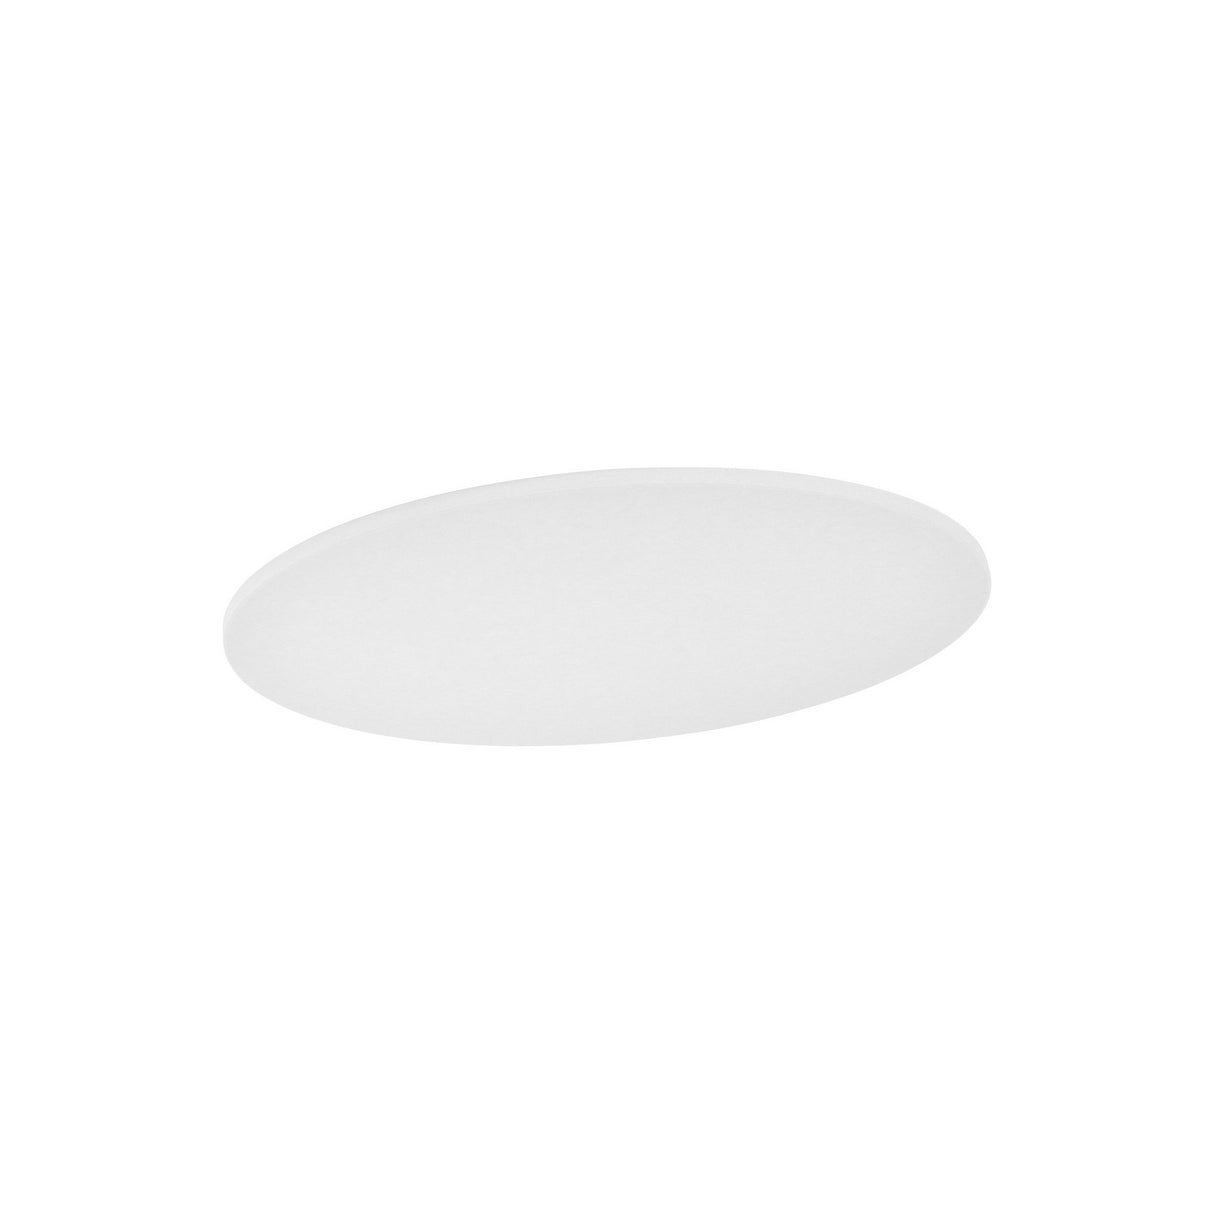 Primacoustic EcoScapes Round Cloud 33-Inch Micro-Beveled Edge Wall Panel, Glacier 2-Pack